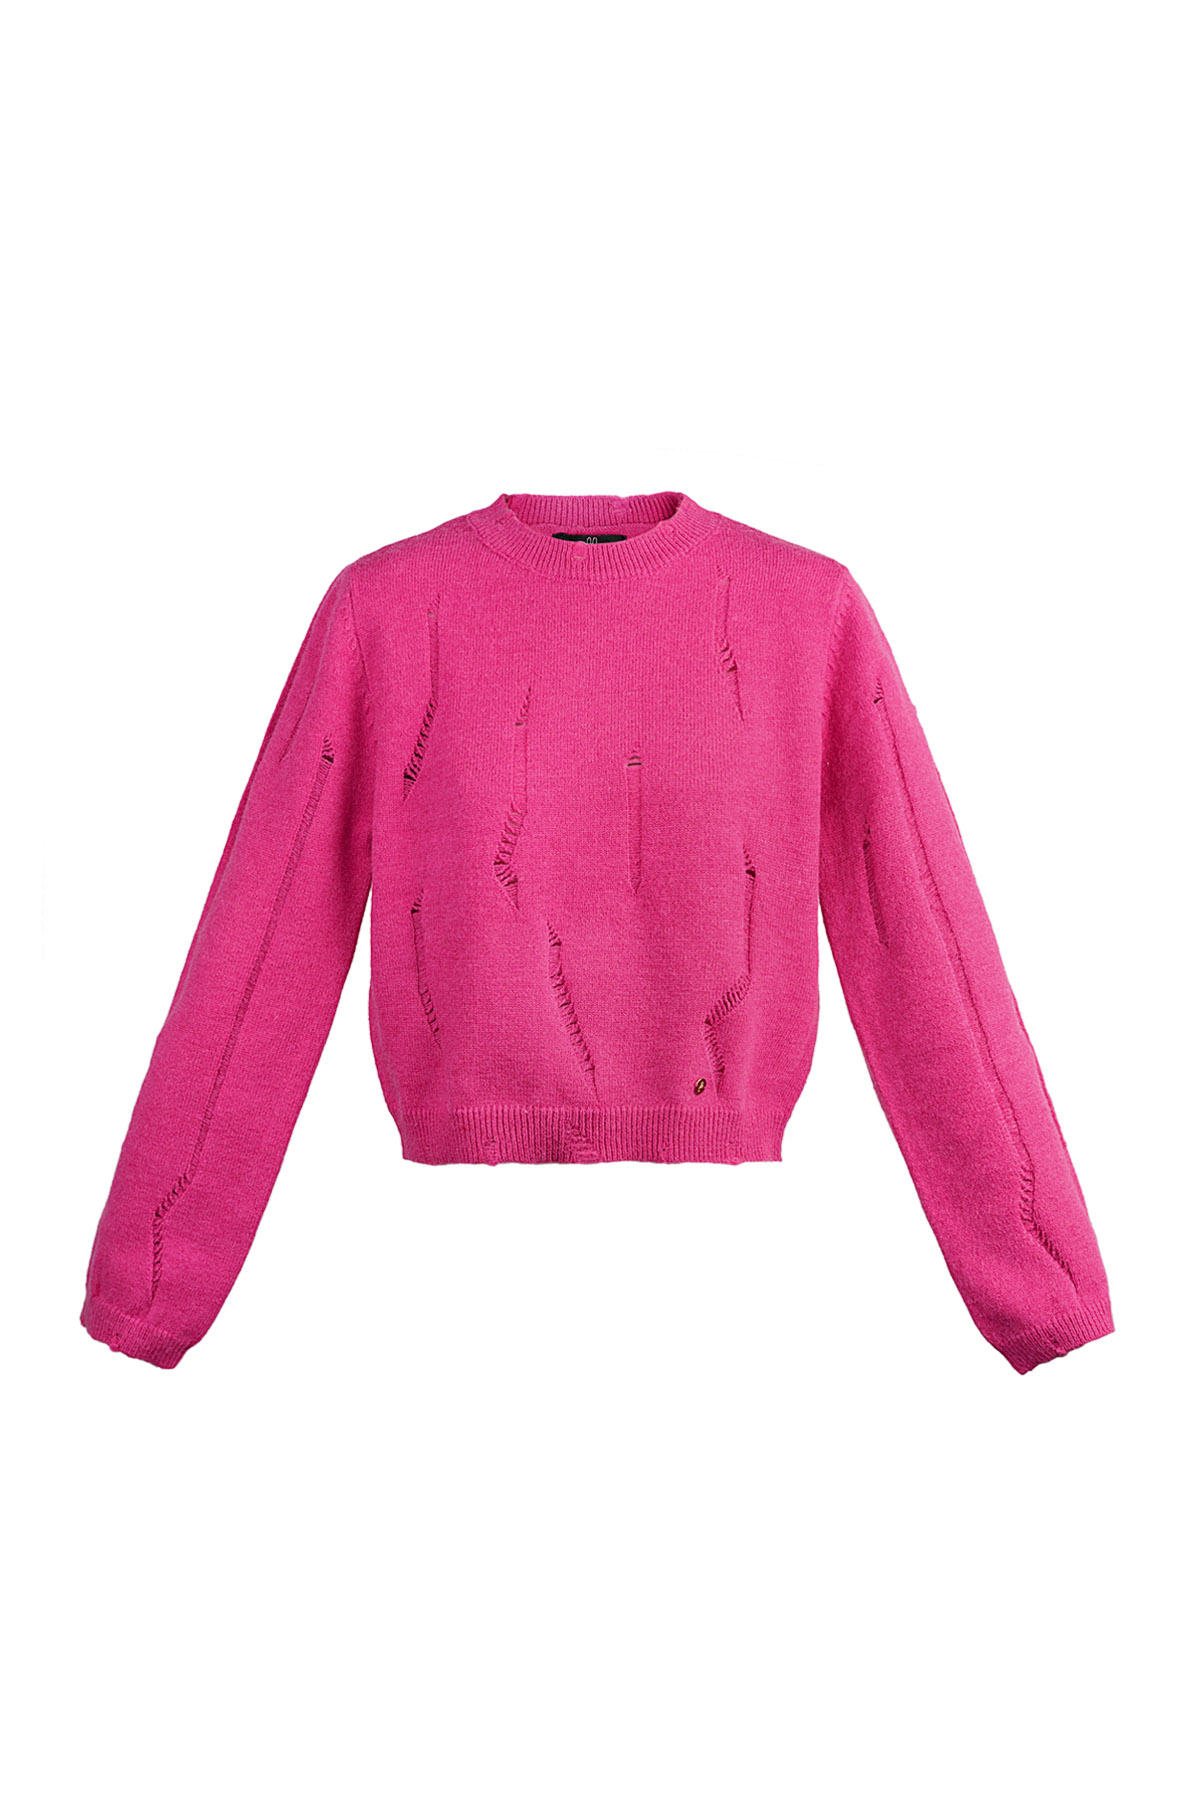 Knitted sweater with tears - pink